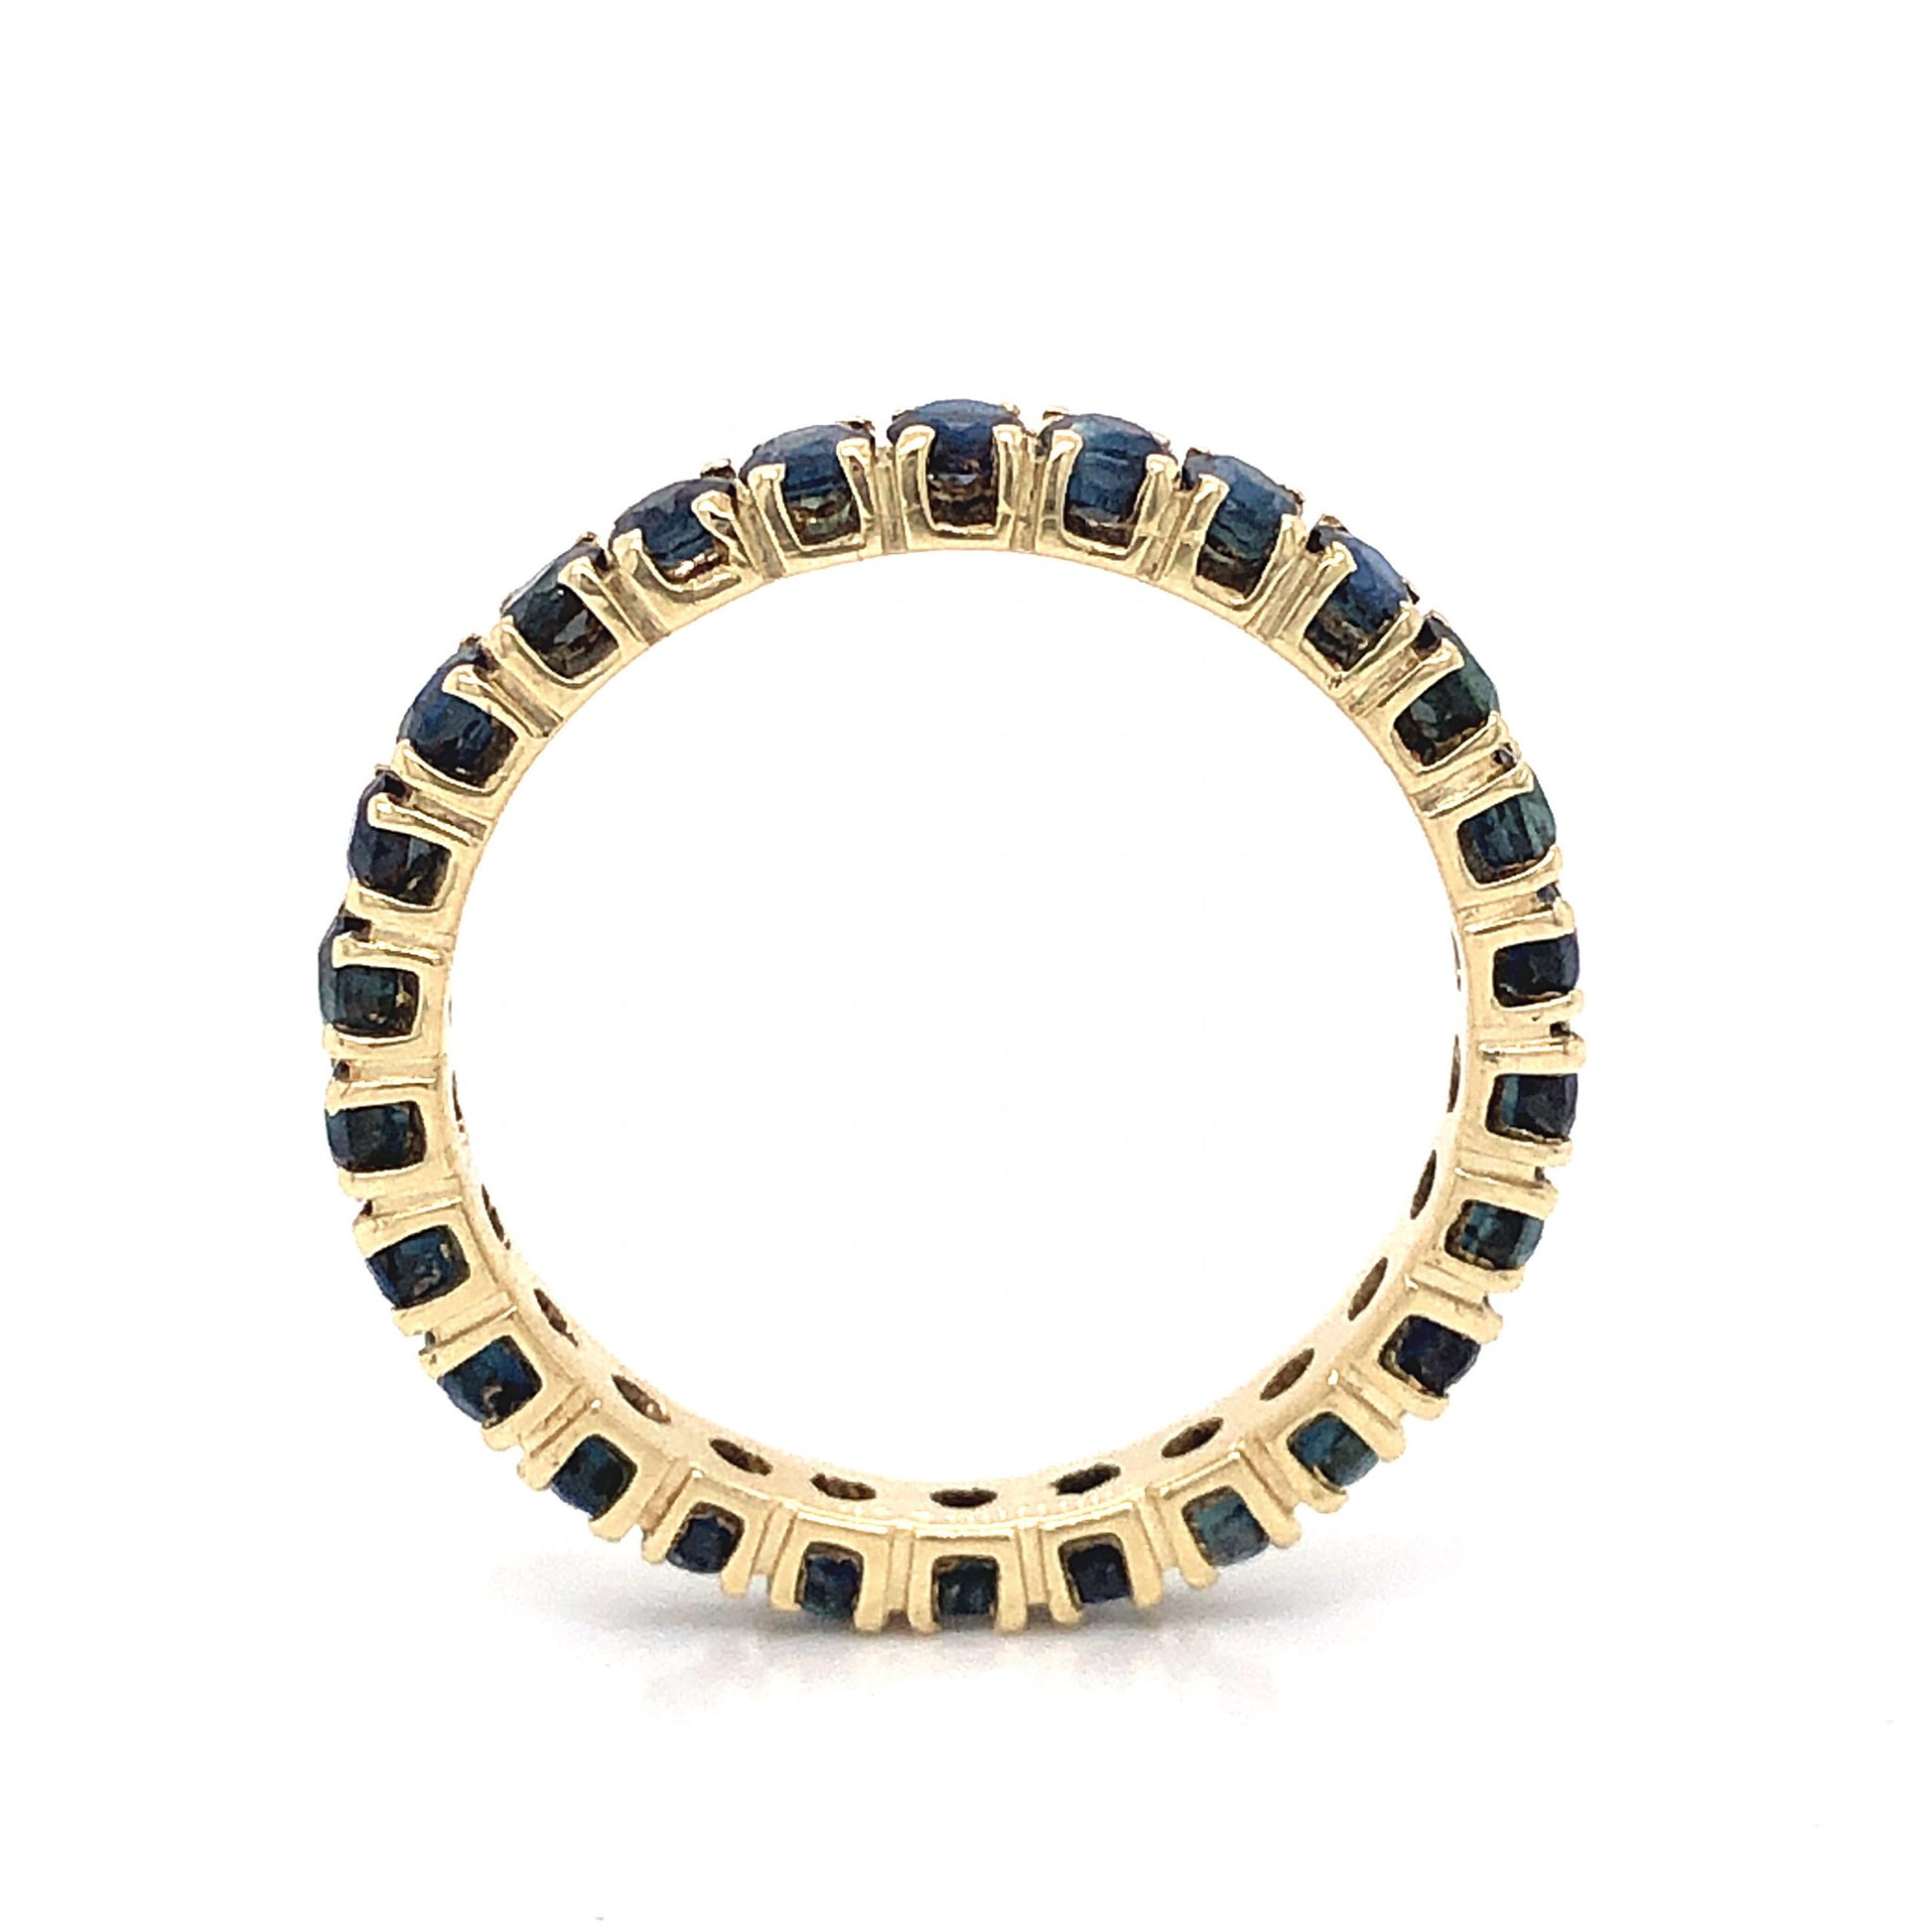 Round Sapphire Eternity Wedding Band in 14k Yellow GoldComposition: PlatinumRing Size: 6.75Total Gram Weight: 2.4 gInscription: 14k